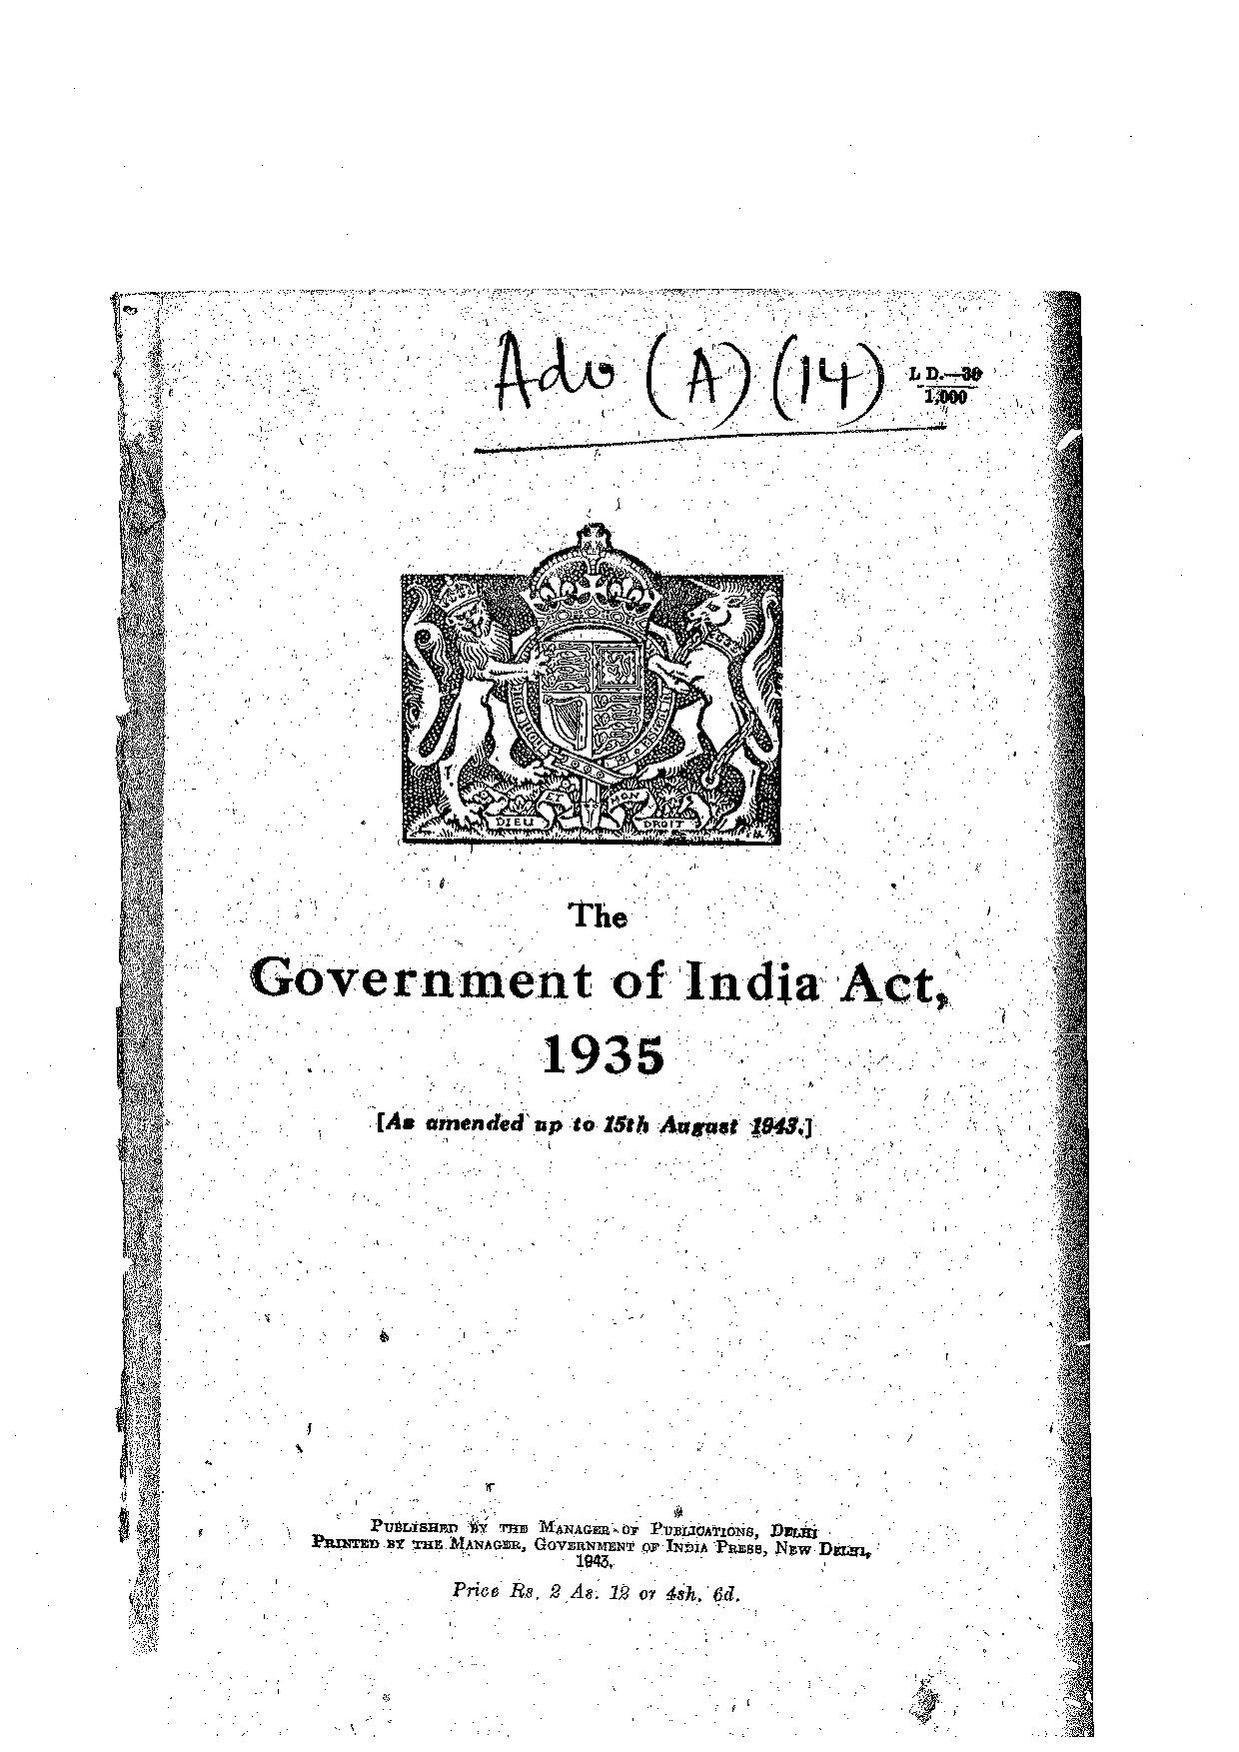 assignment on government of india act 1935